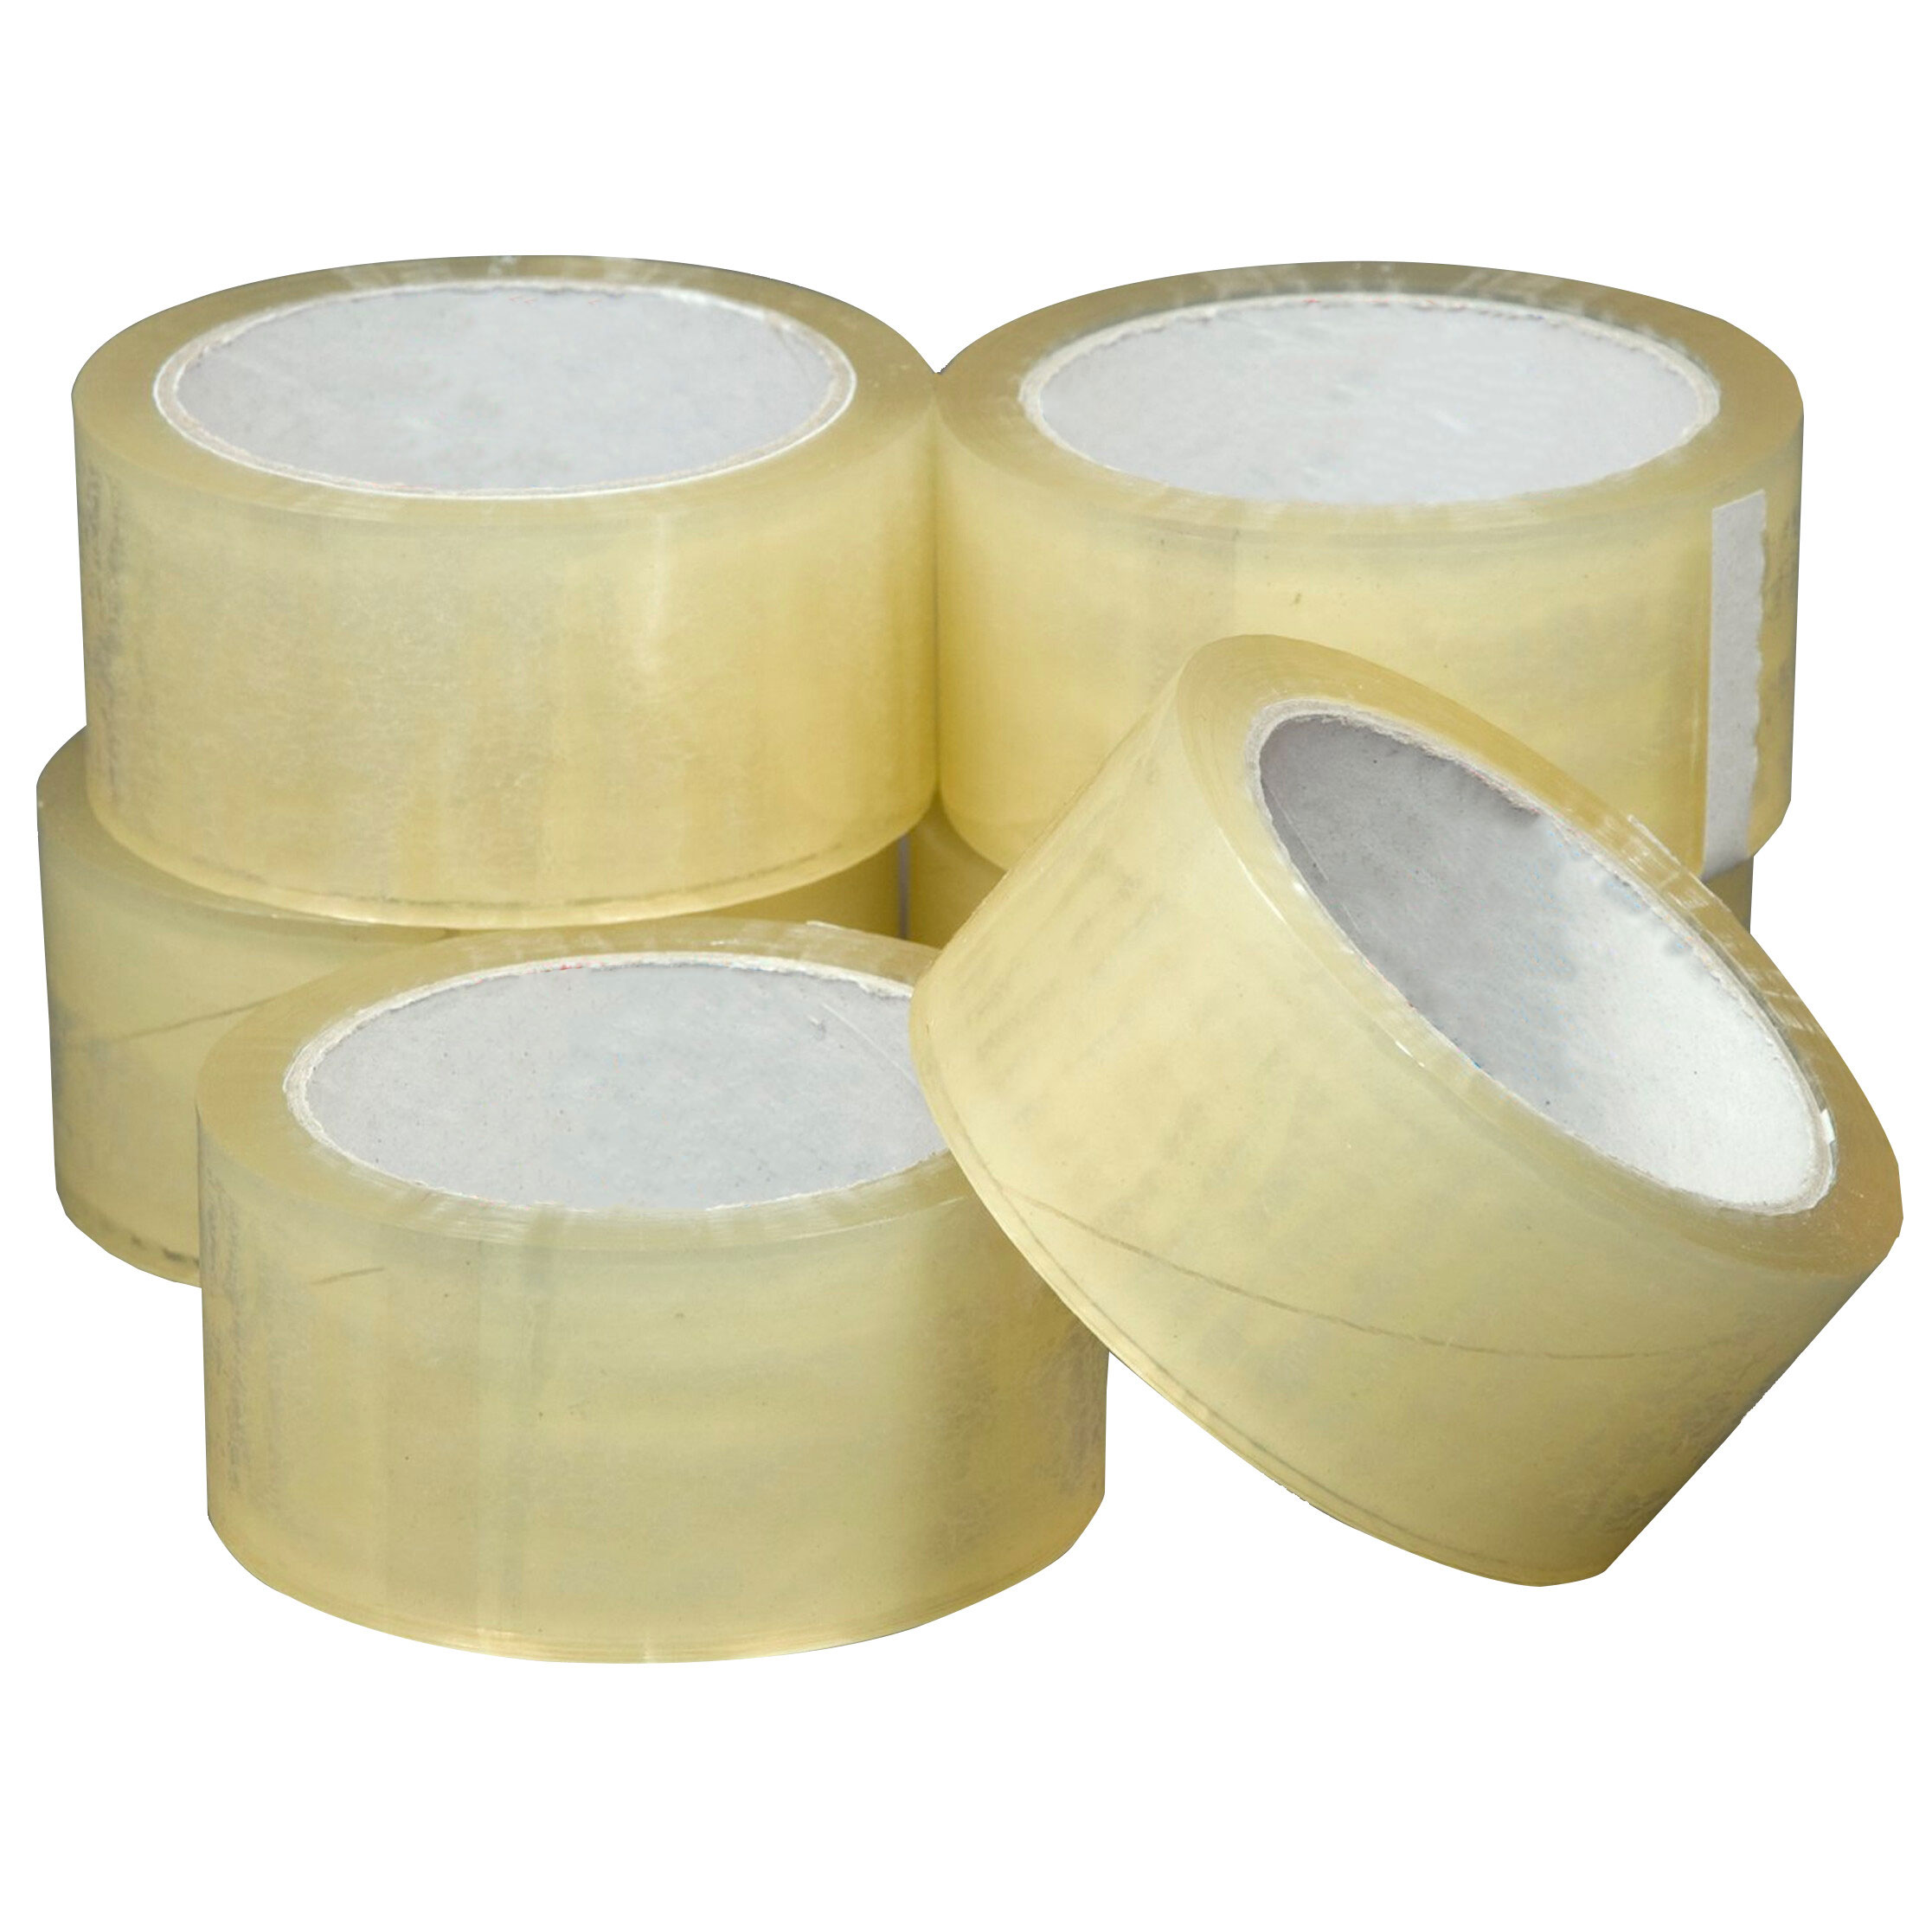 LONG LENGTH FRAGILE TAPE LOW NOISE 48mm x 66M STRONG PACKING PARCEL TAPE 